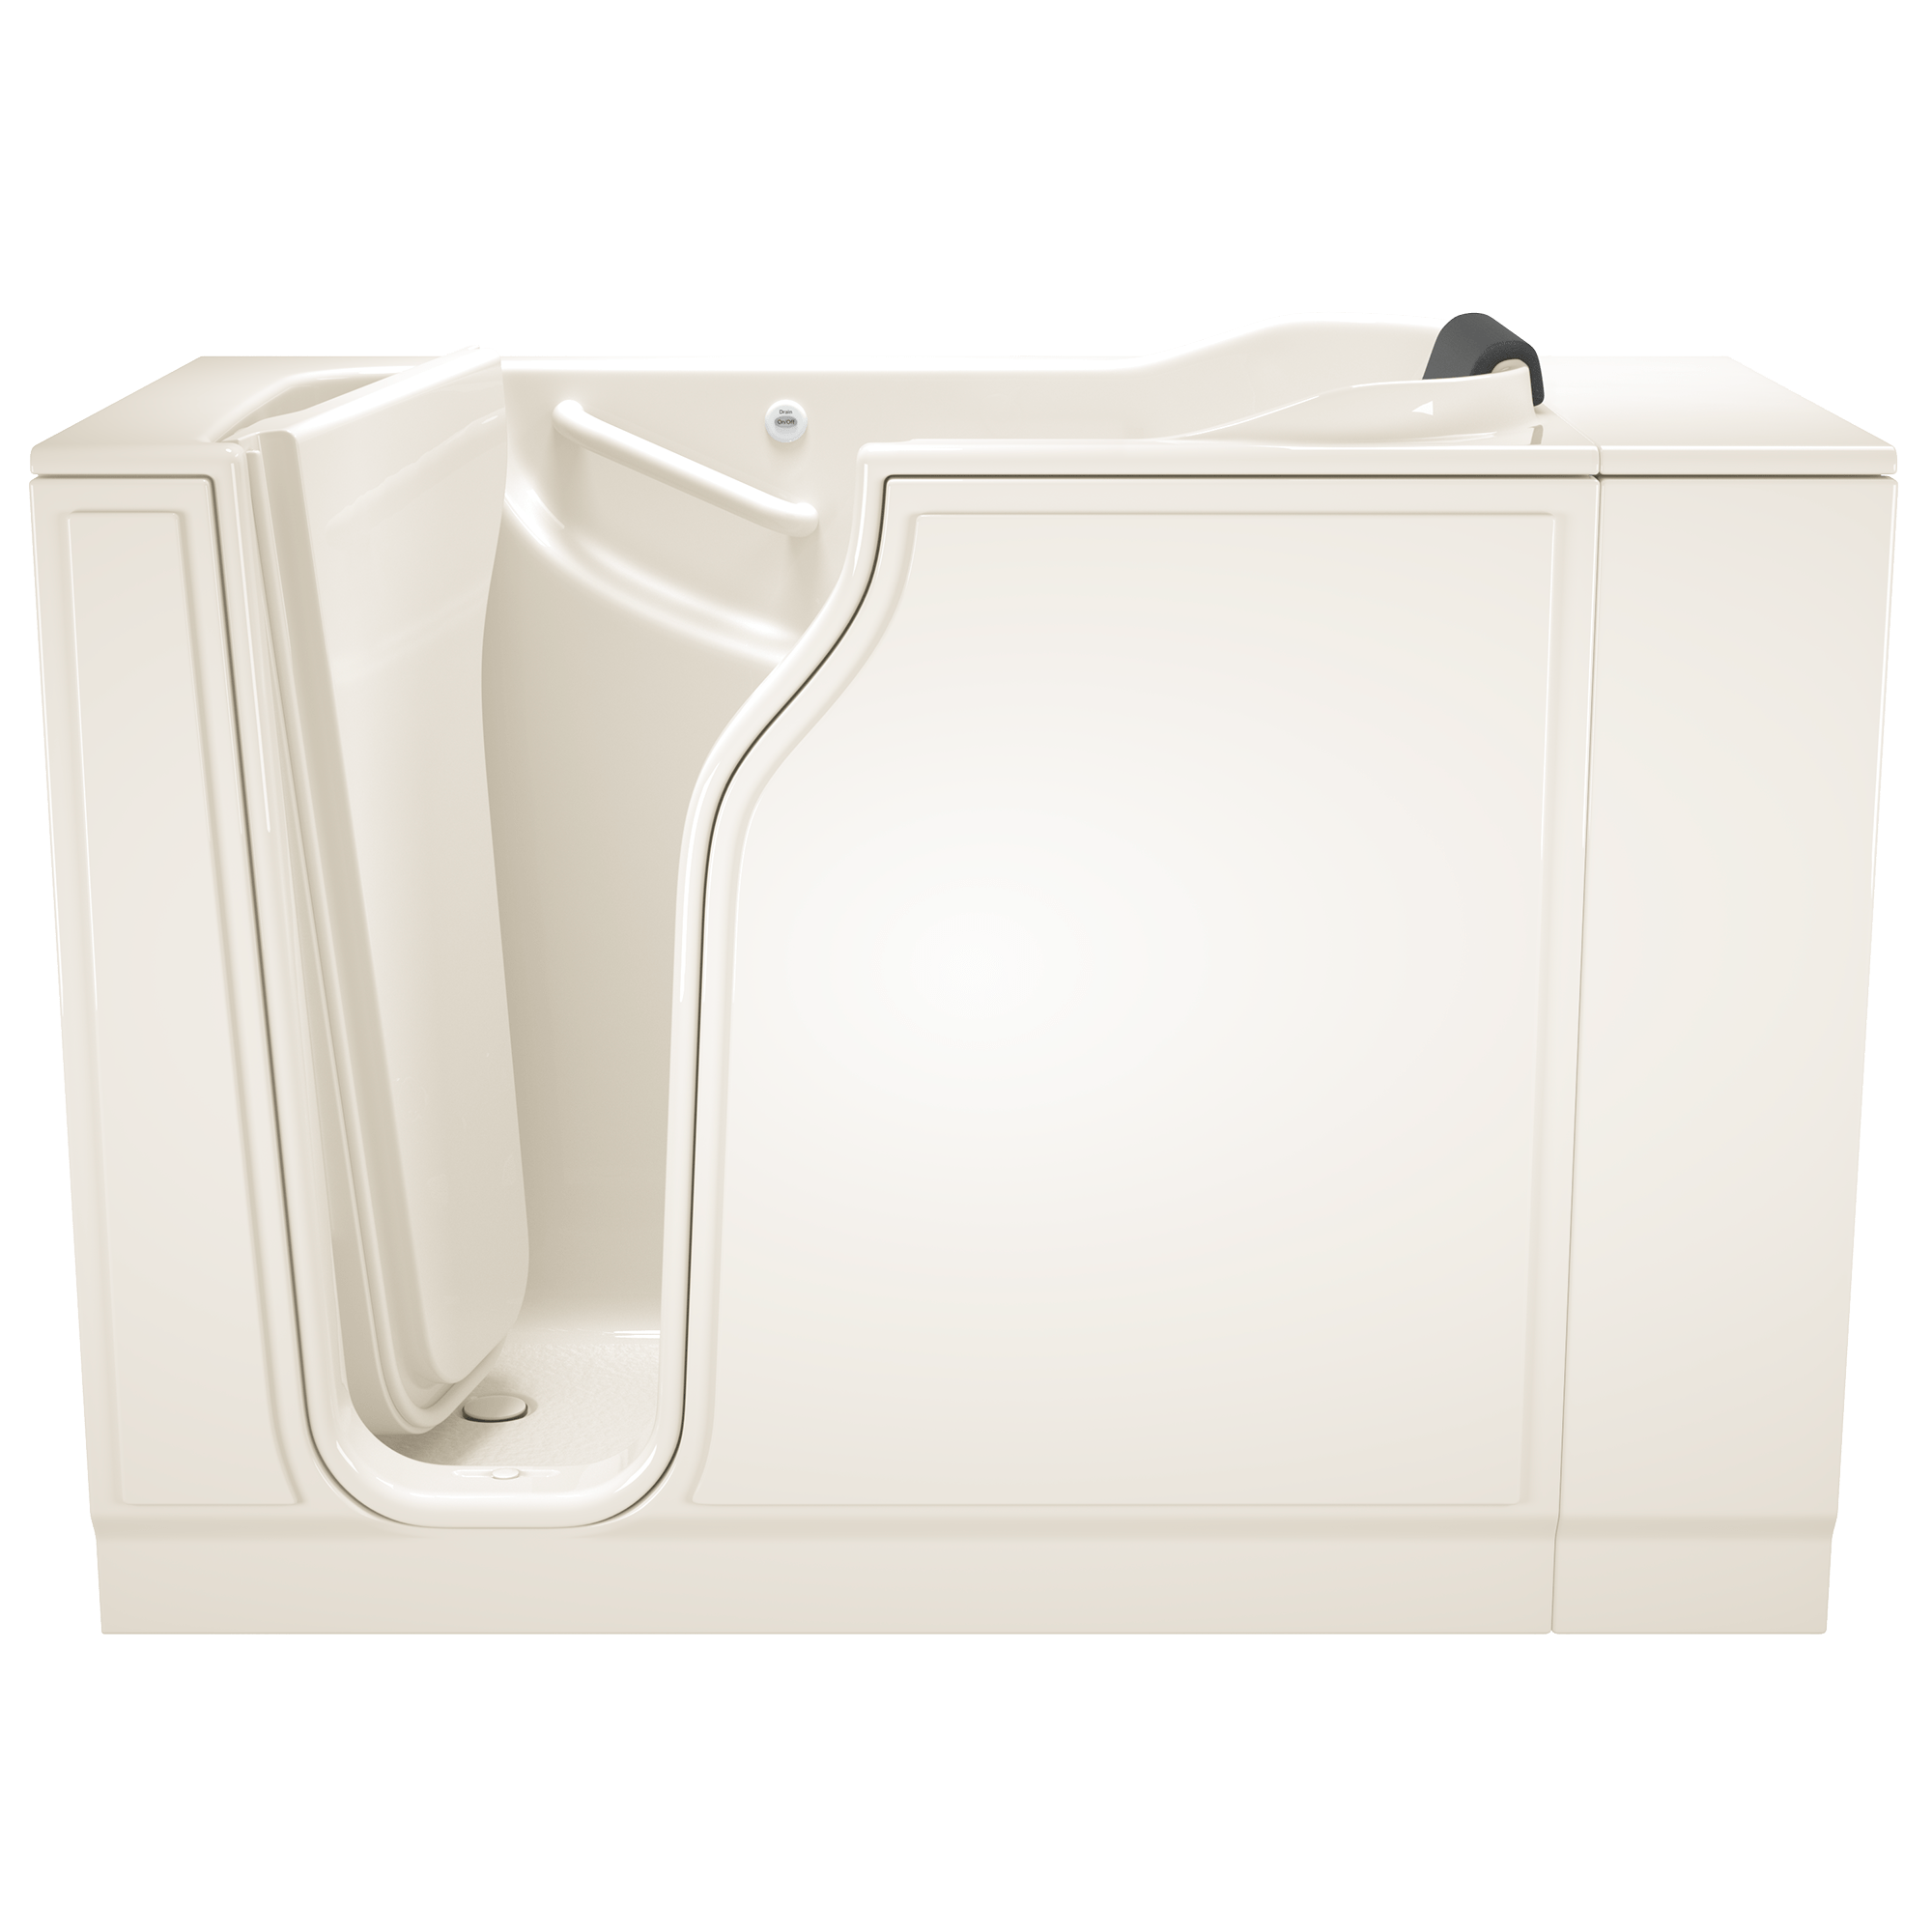 Gelcoat Premium Series 30 x 52 -Inch Walk-in Tub With Soaker System - Left-Hand Drain